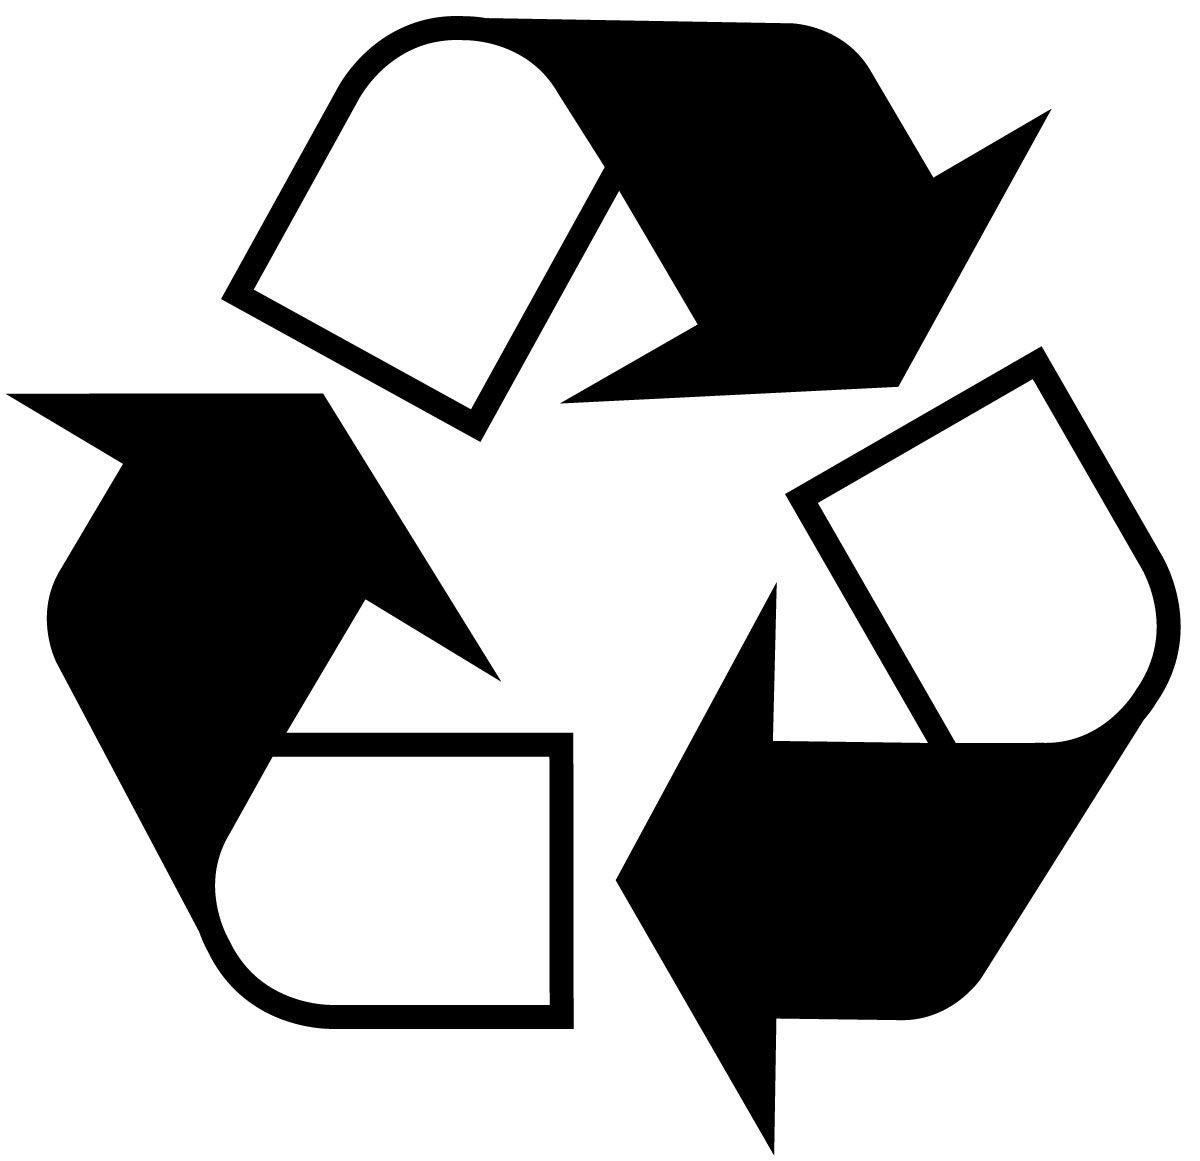 Black Recycle Logo - Free Recycling Logo, Download Free Clip Art, Free Clip Art on ...